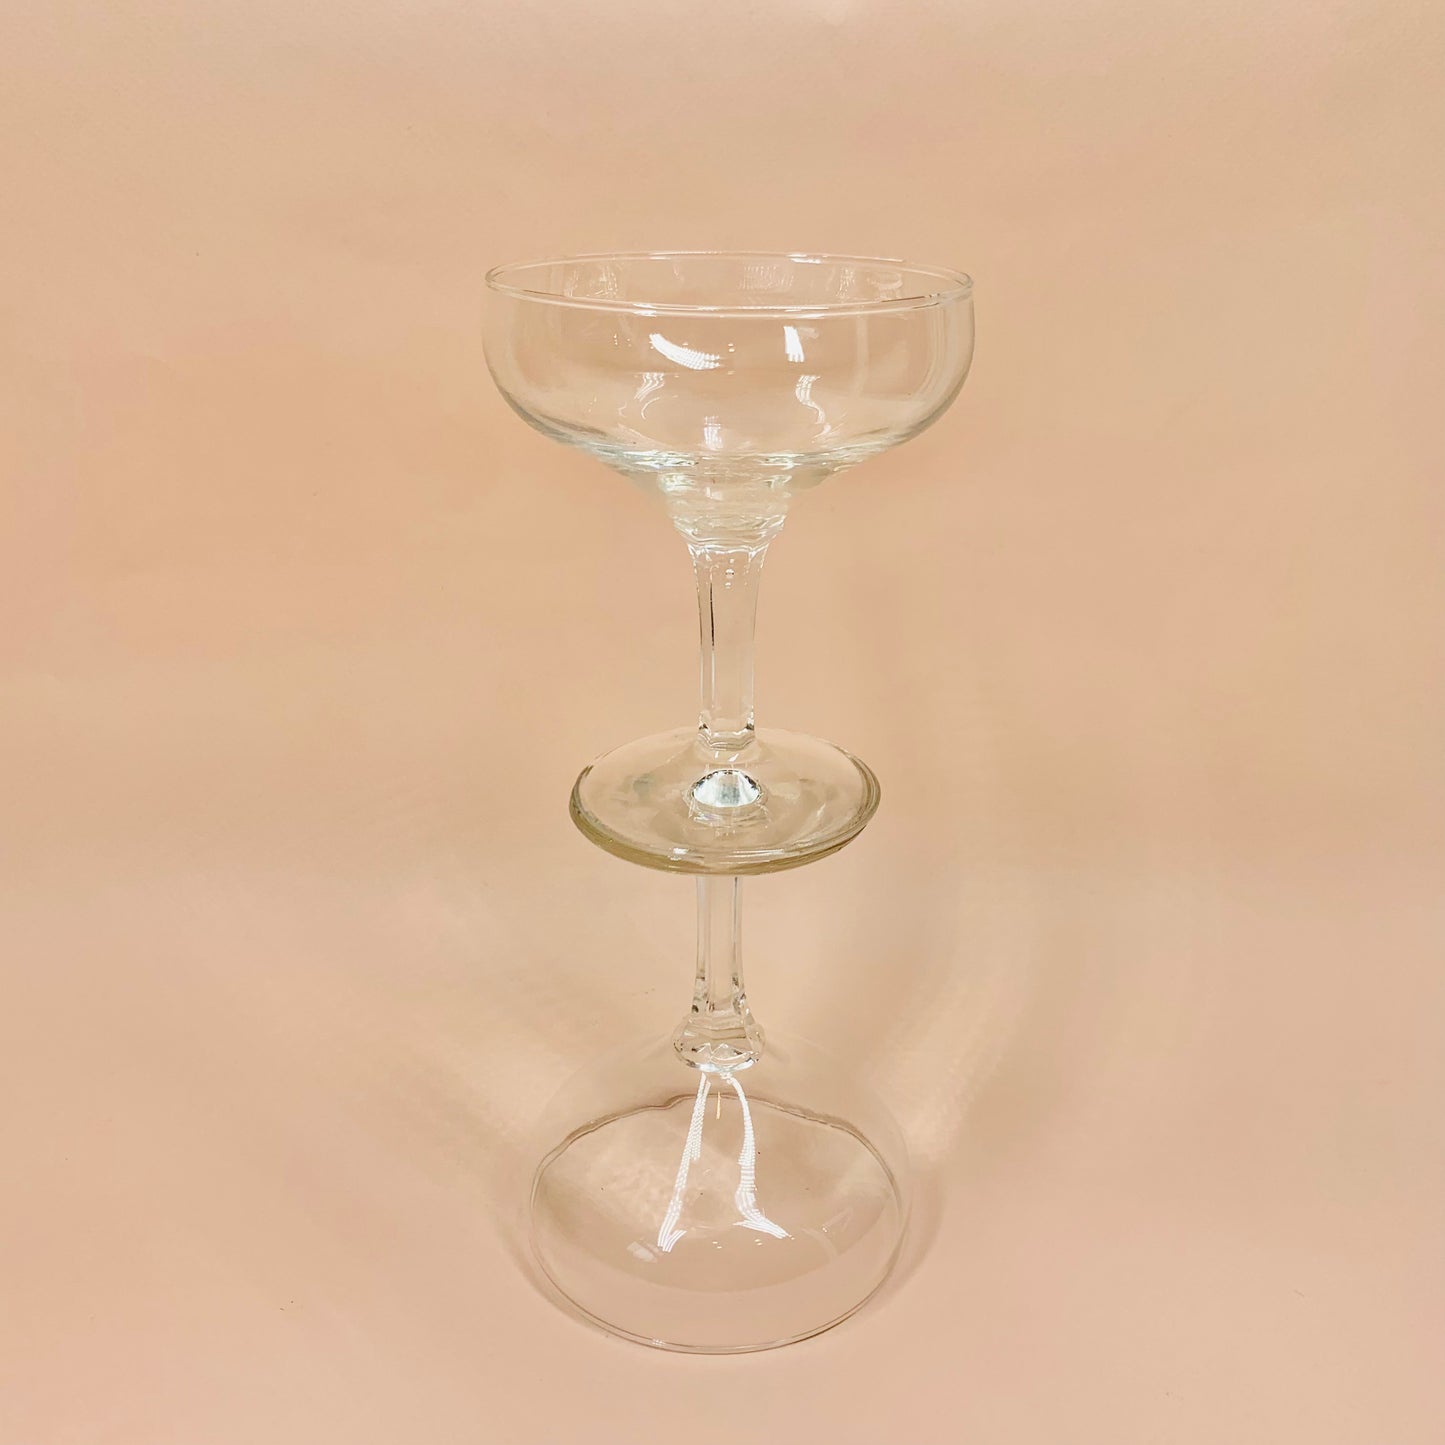 Antique glass champagne coupe with faceted stem